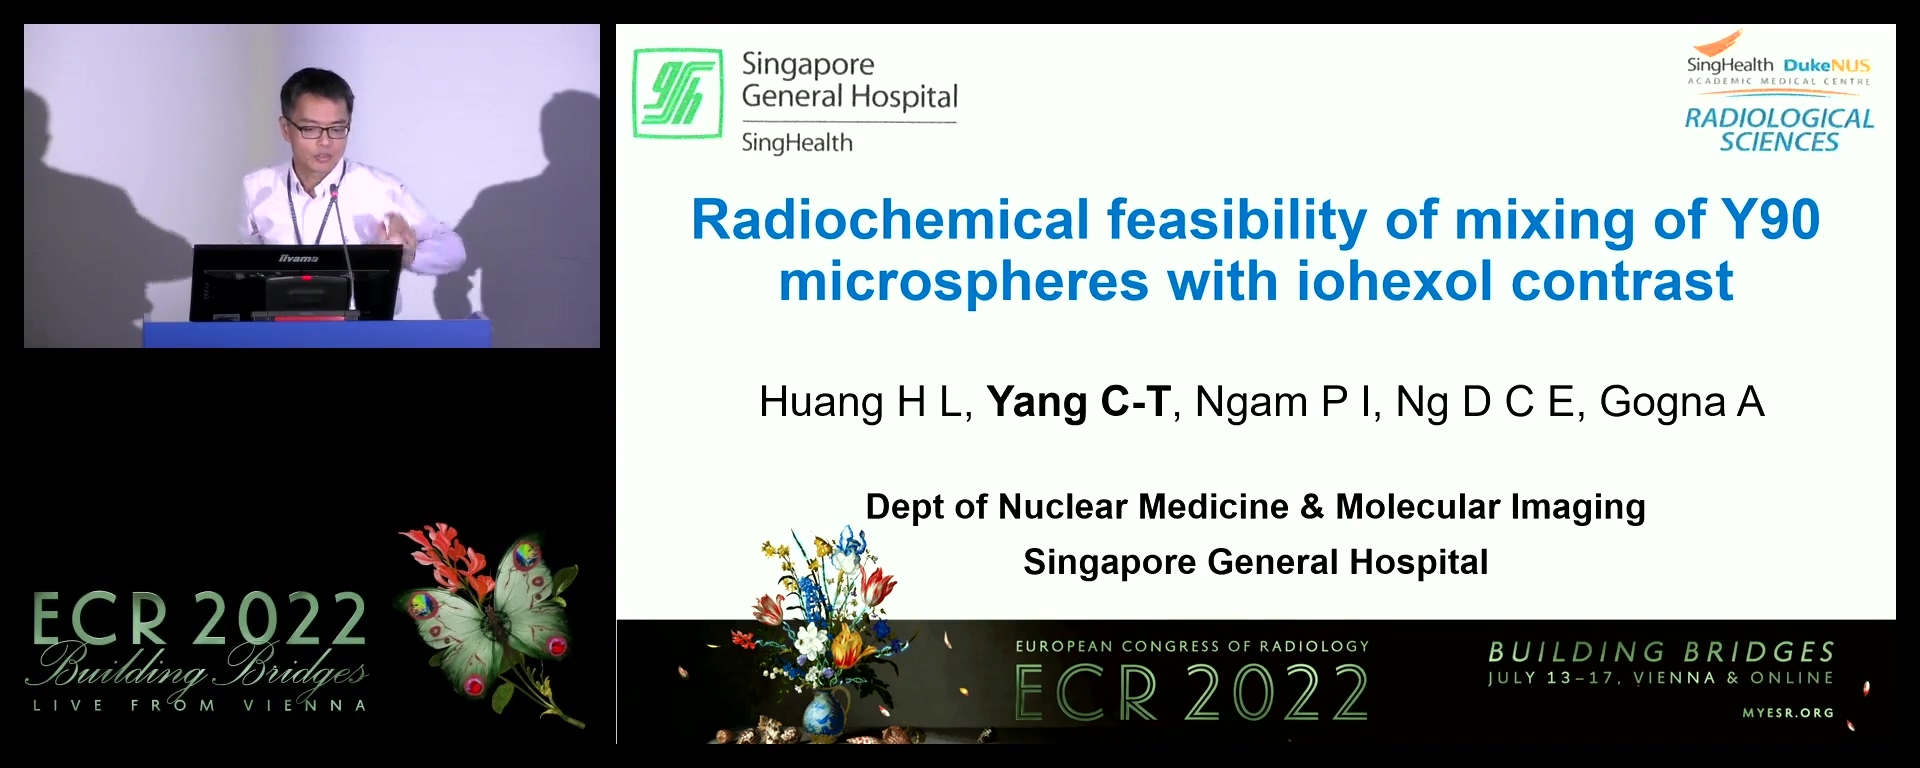 Radiochemical feasibility of mixing of Y90 and iohexol contrast for radioembolisation therapy - Huang Liang, London / UK